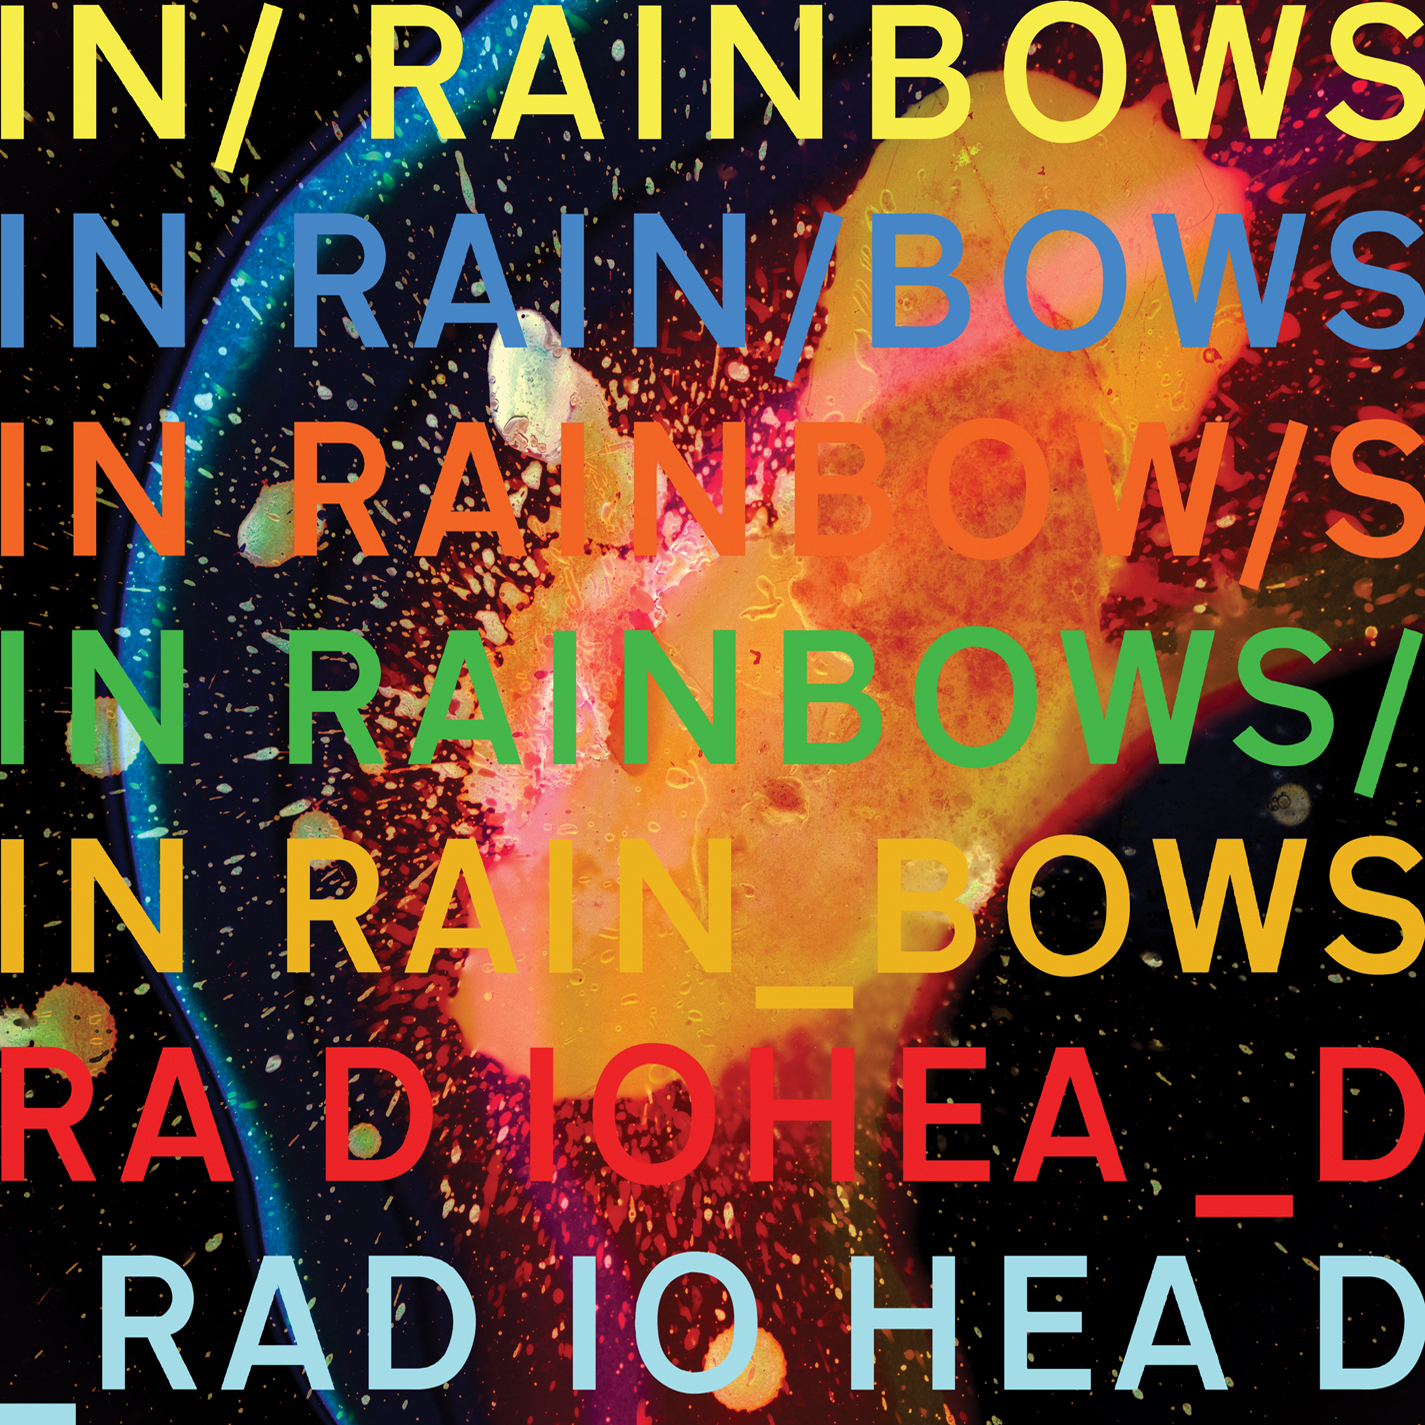 Radiohead In Rainbows, img from NLM by permission.